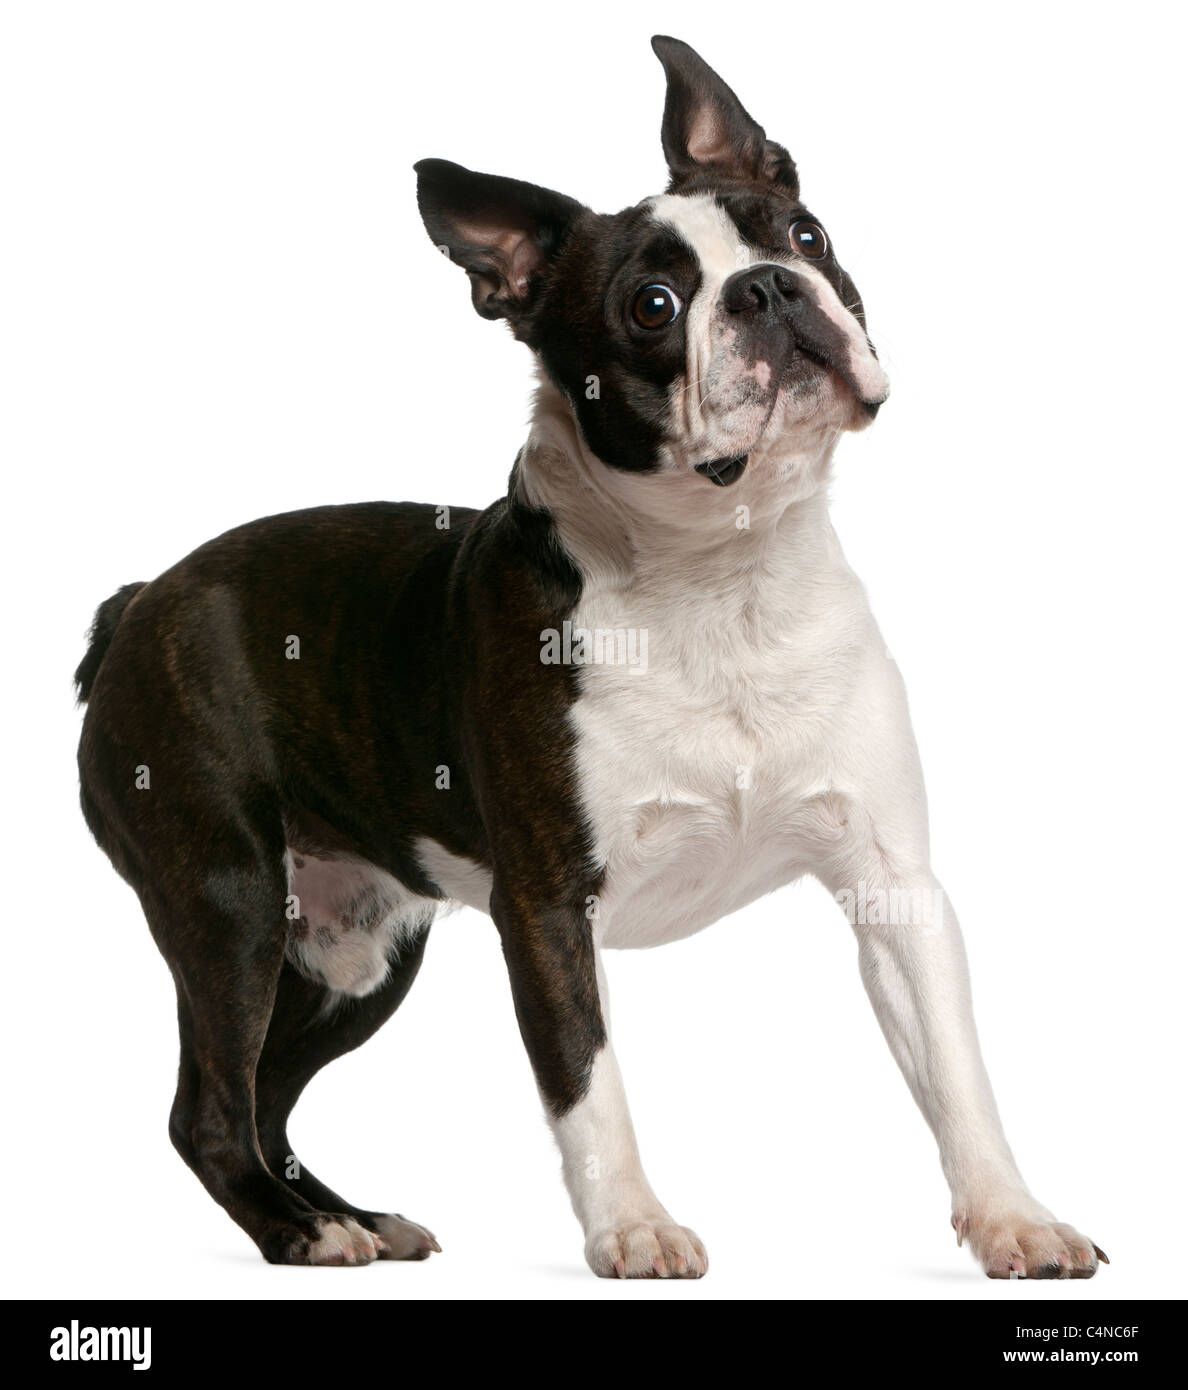 Boston Terrier, 1 year old, standing in front of white background Stock Photo